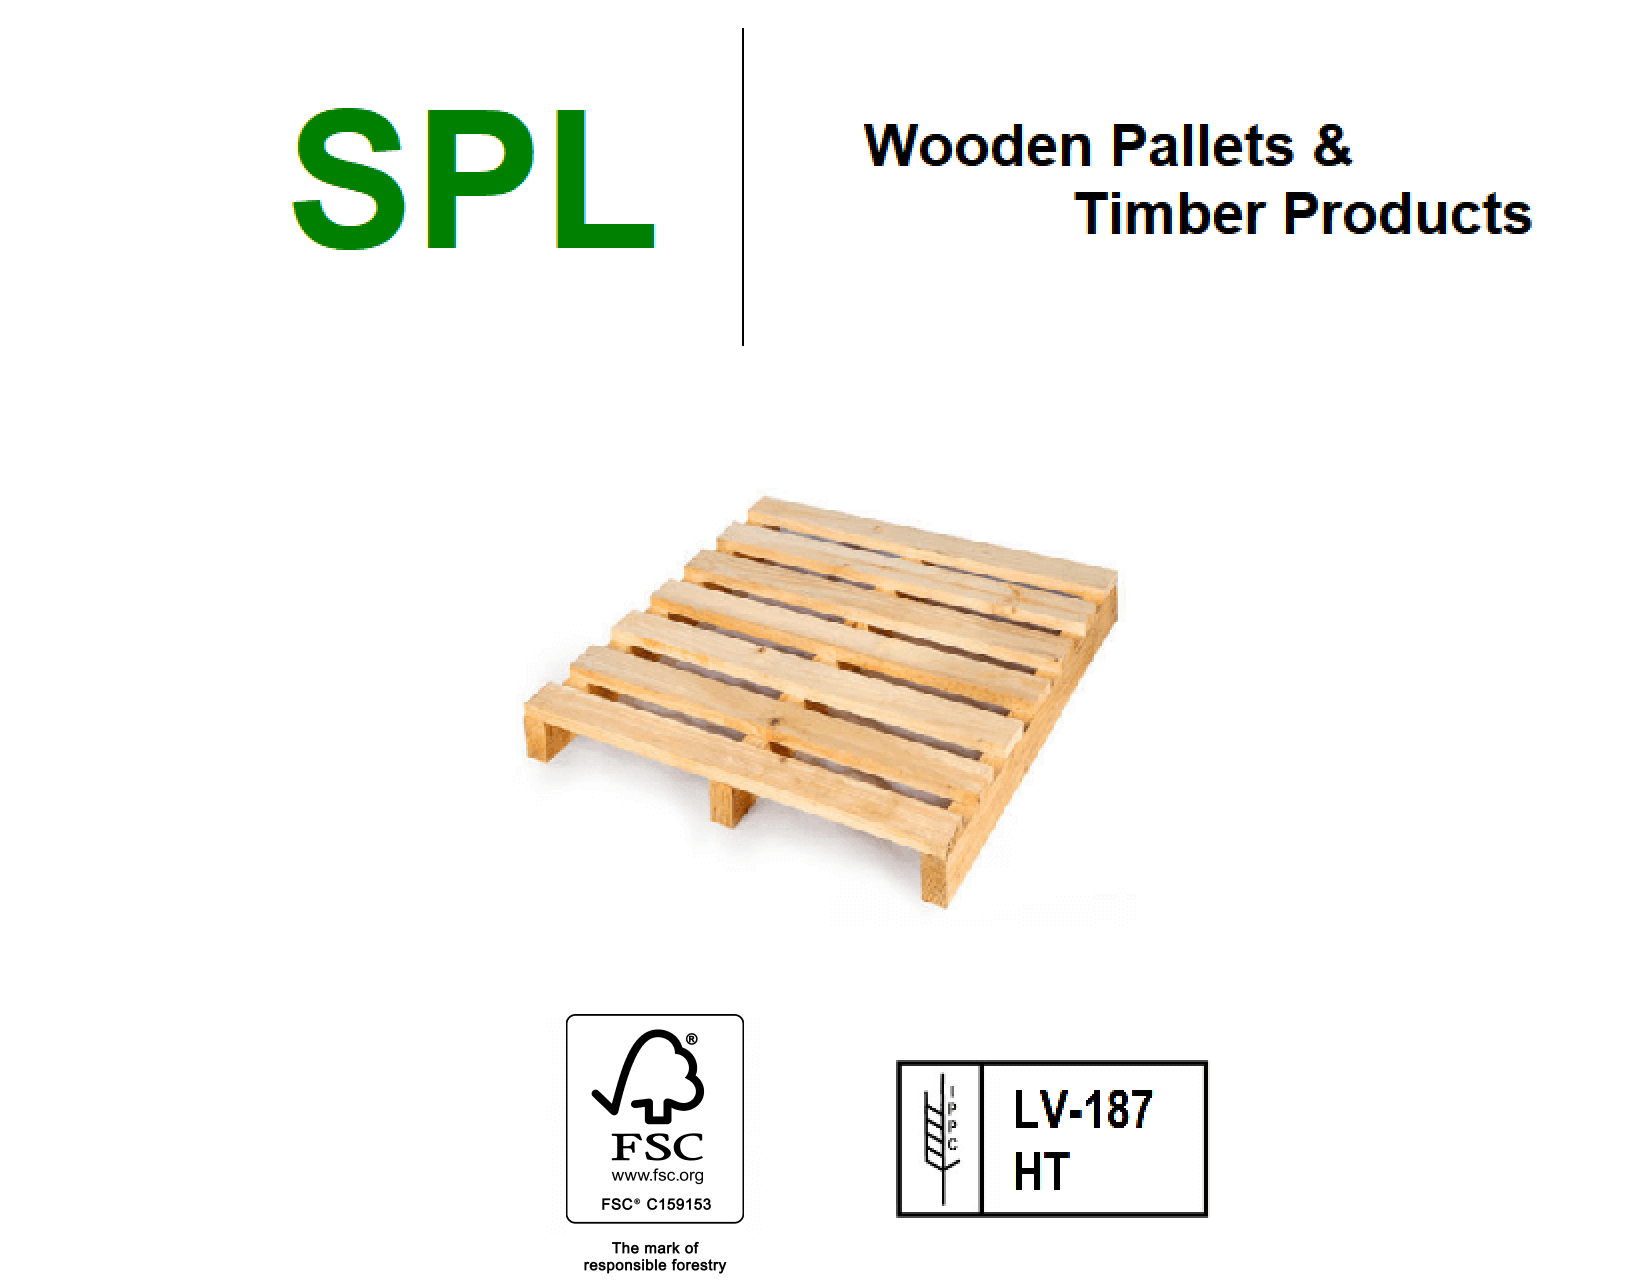 SPL - Wooden Pallets & Timber products